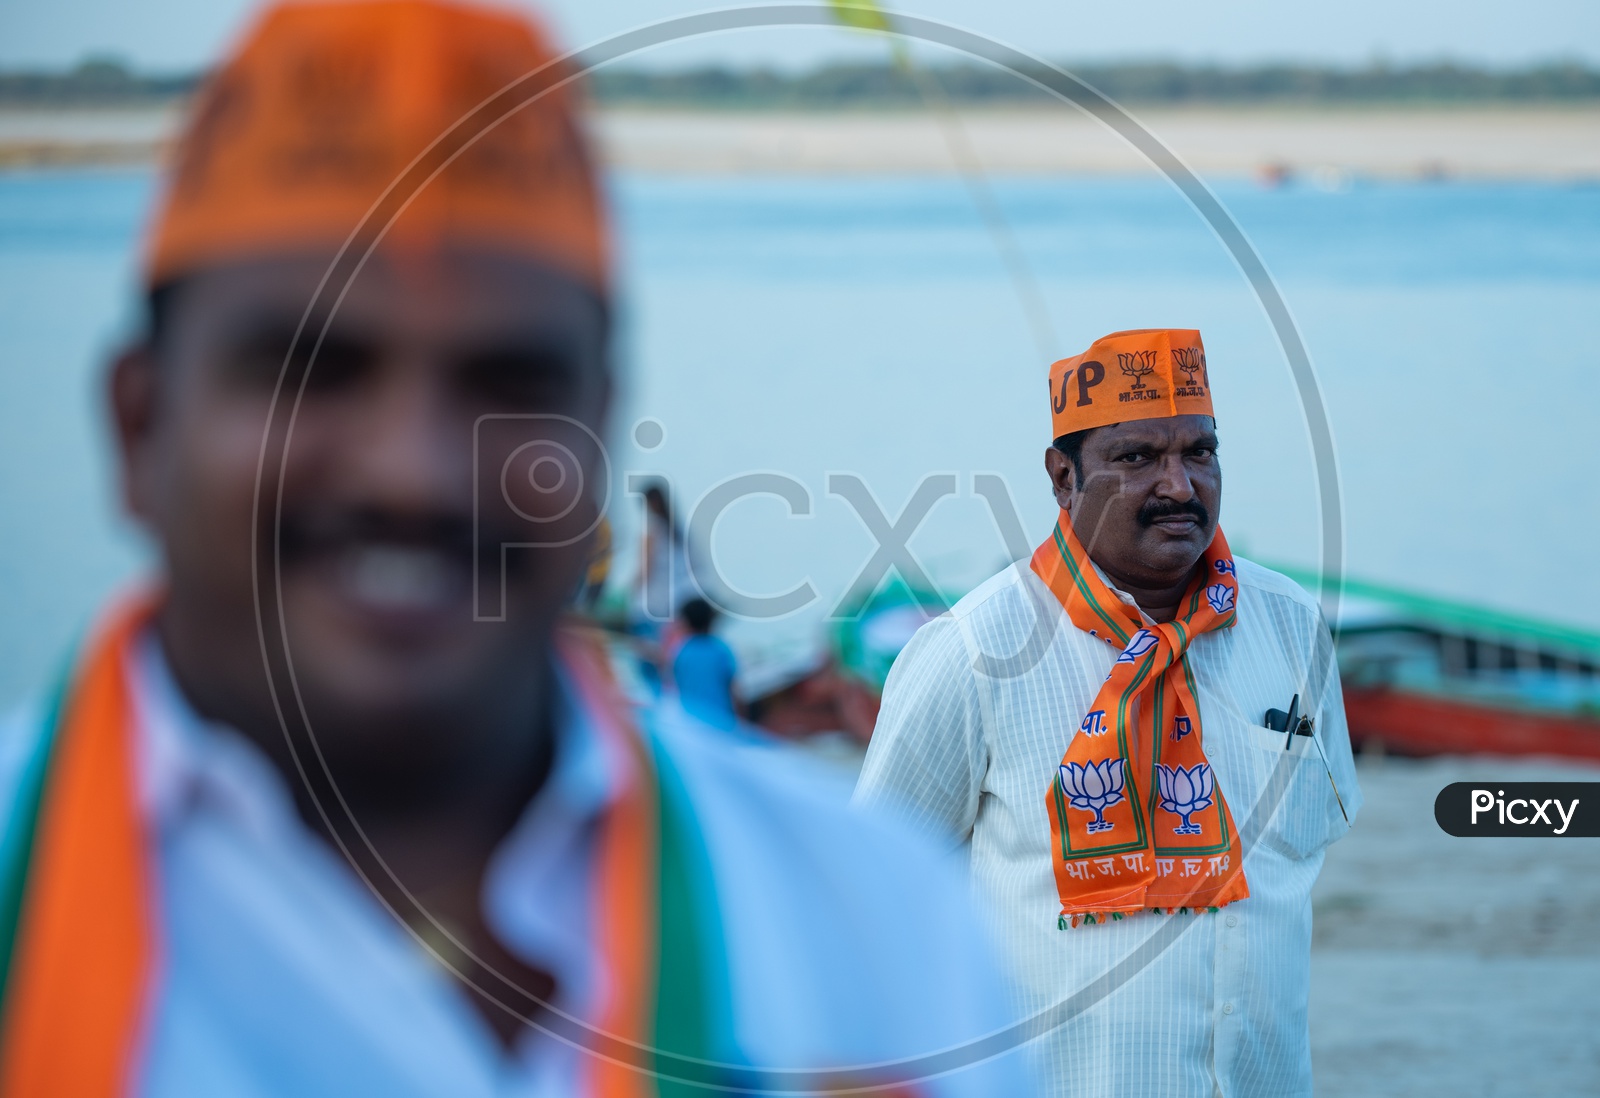 BJP Party Workers Or Supporters Wearing Party Caps And Towels In Election Campaigns